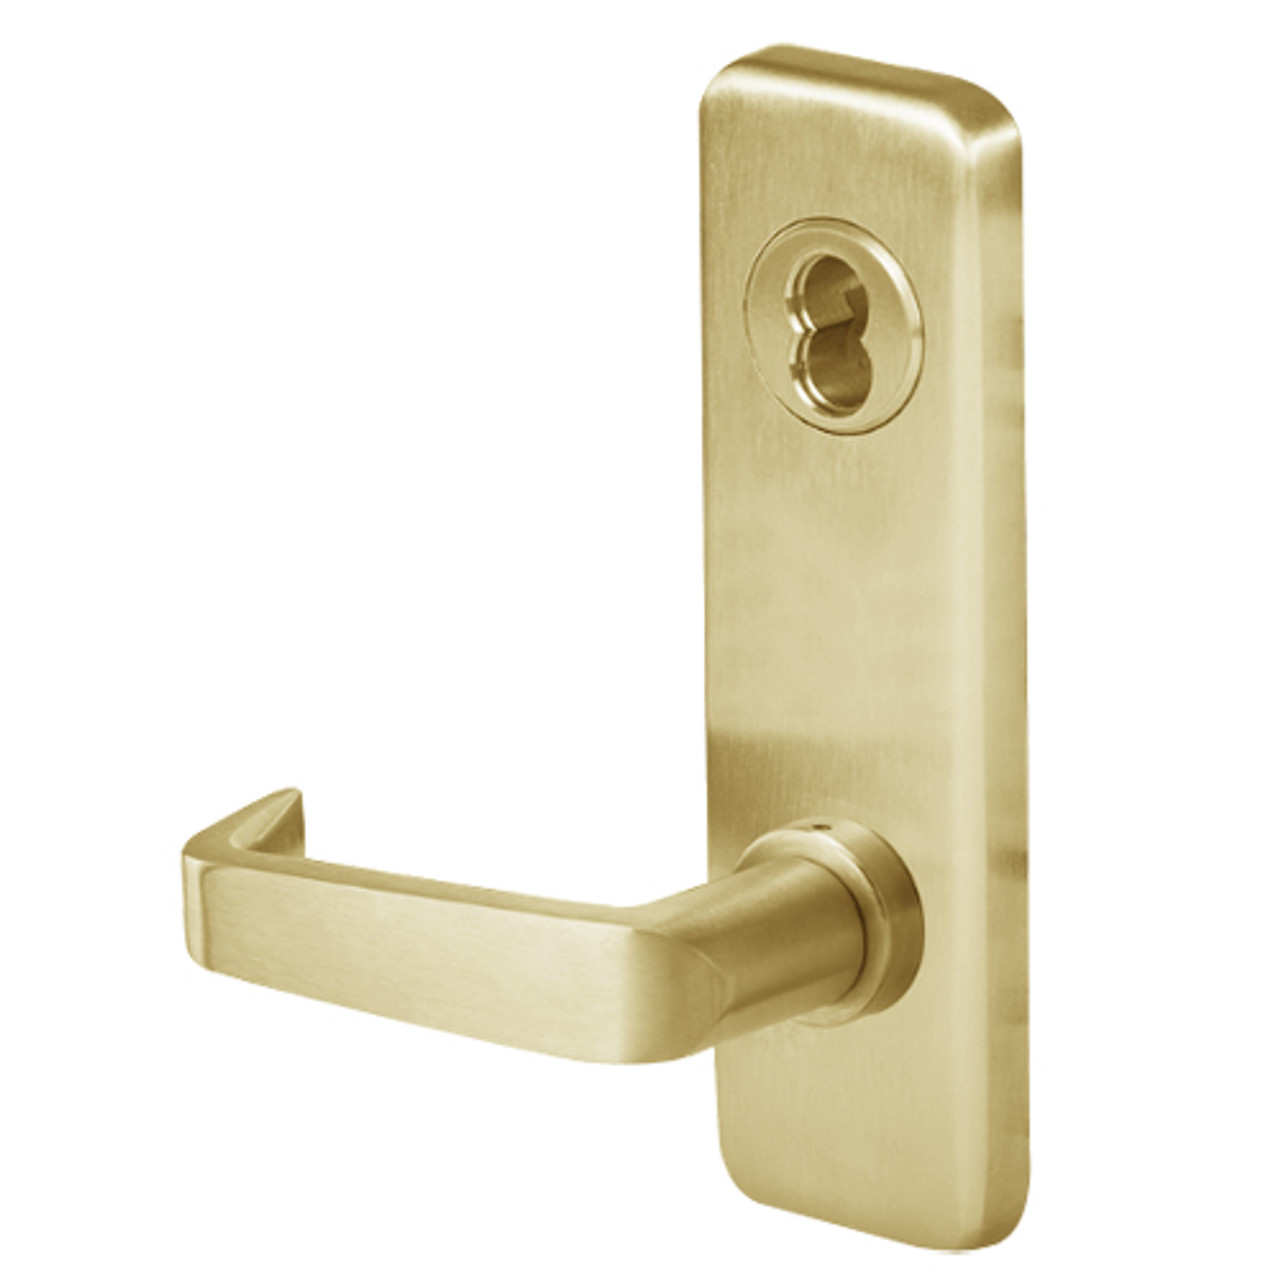 45HW7TWEL15J606RQE12V Best 40HW series Double Key Deadbolt Fail Safe Electromechanical Mortise Lever Lock with Contour w/ Angle Return Style in Satin Brass